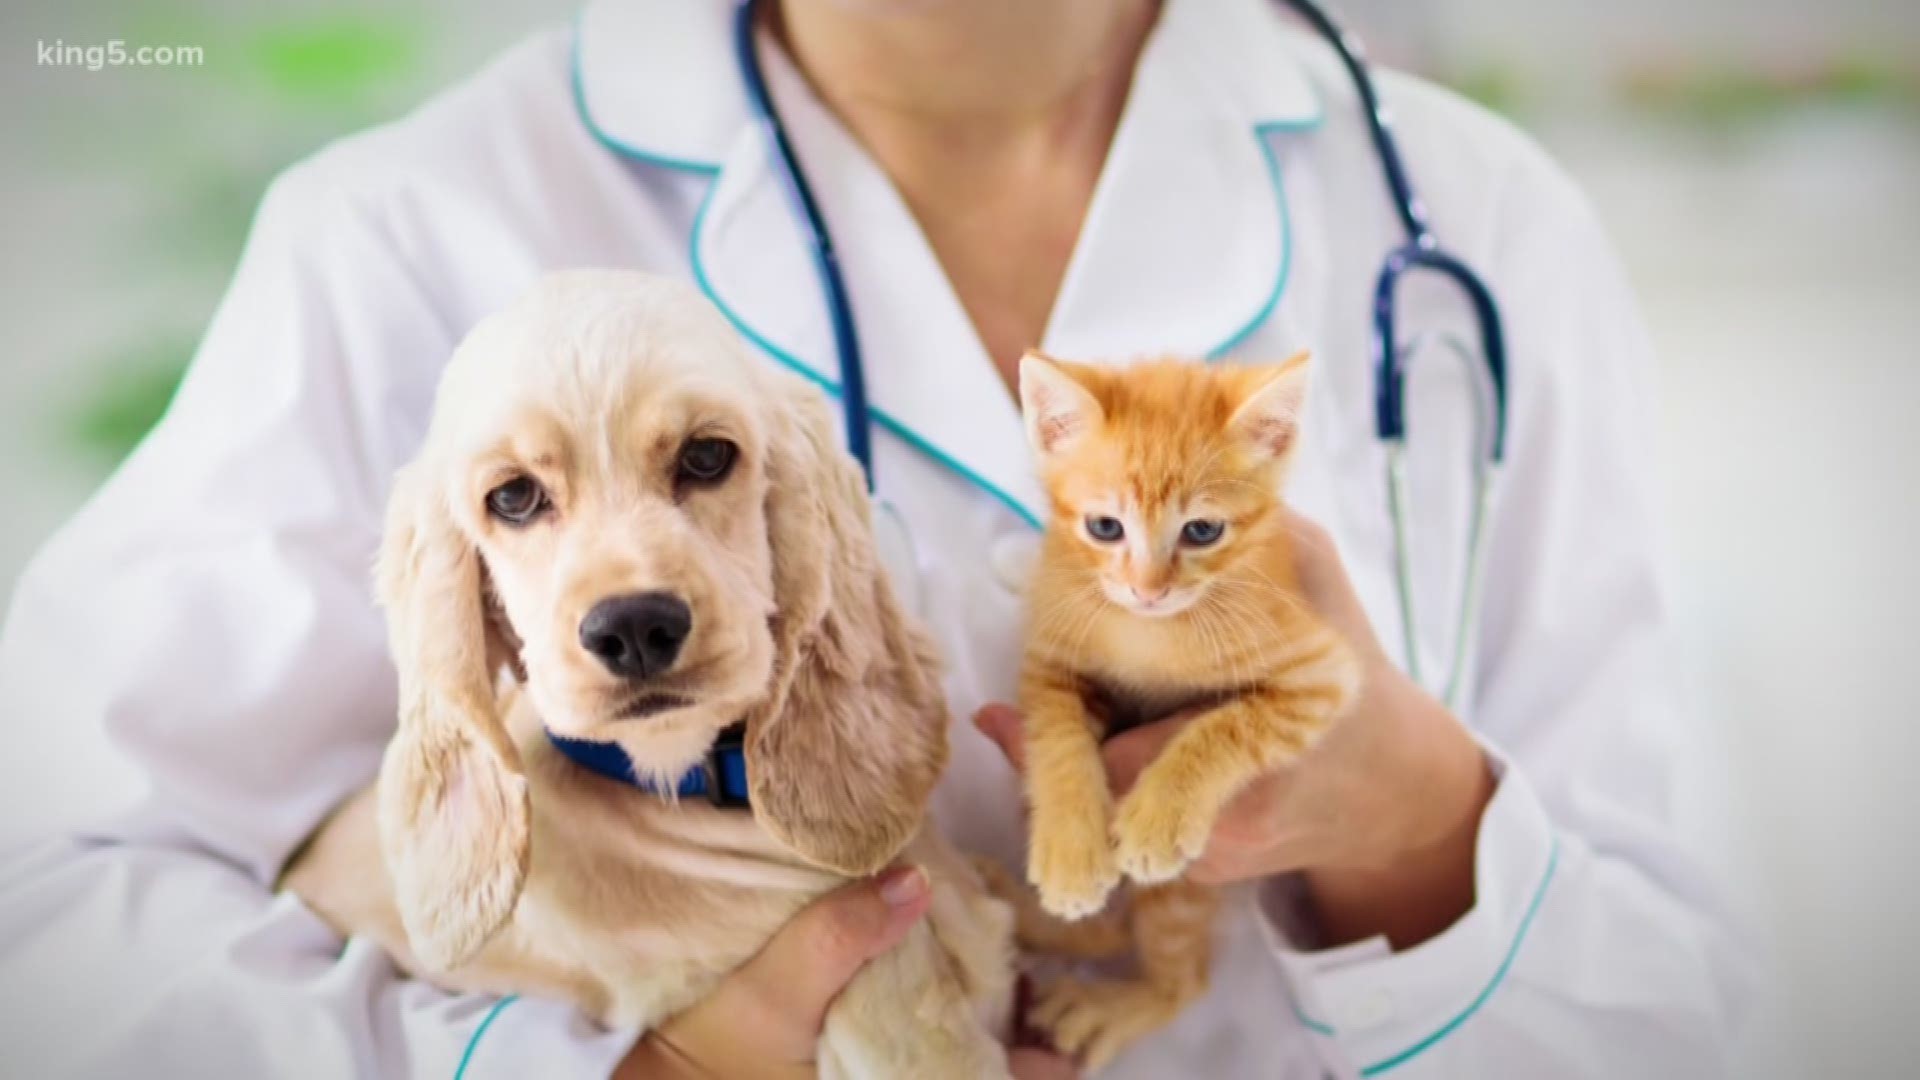 Chris Rogers verifies if pets are at risk in catching the coronavirus.